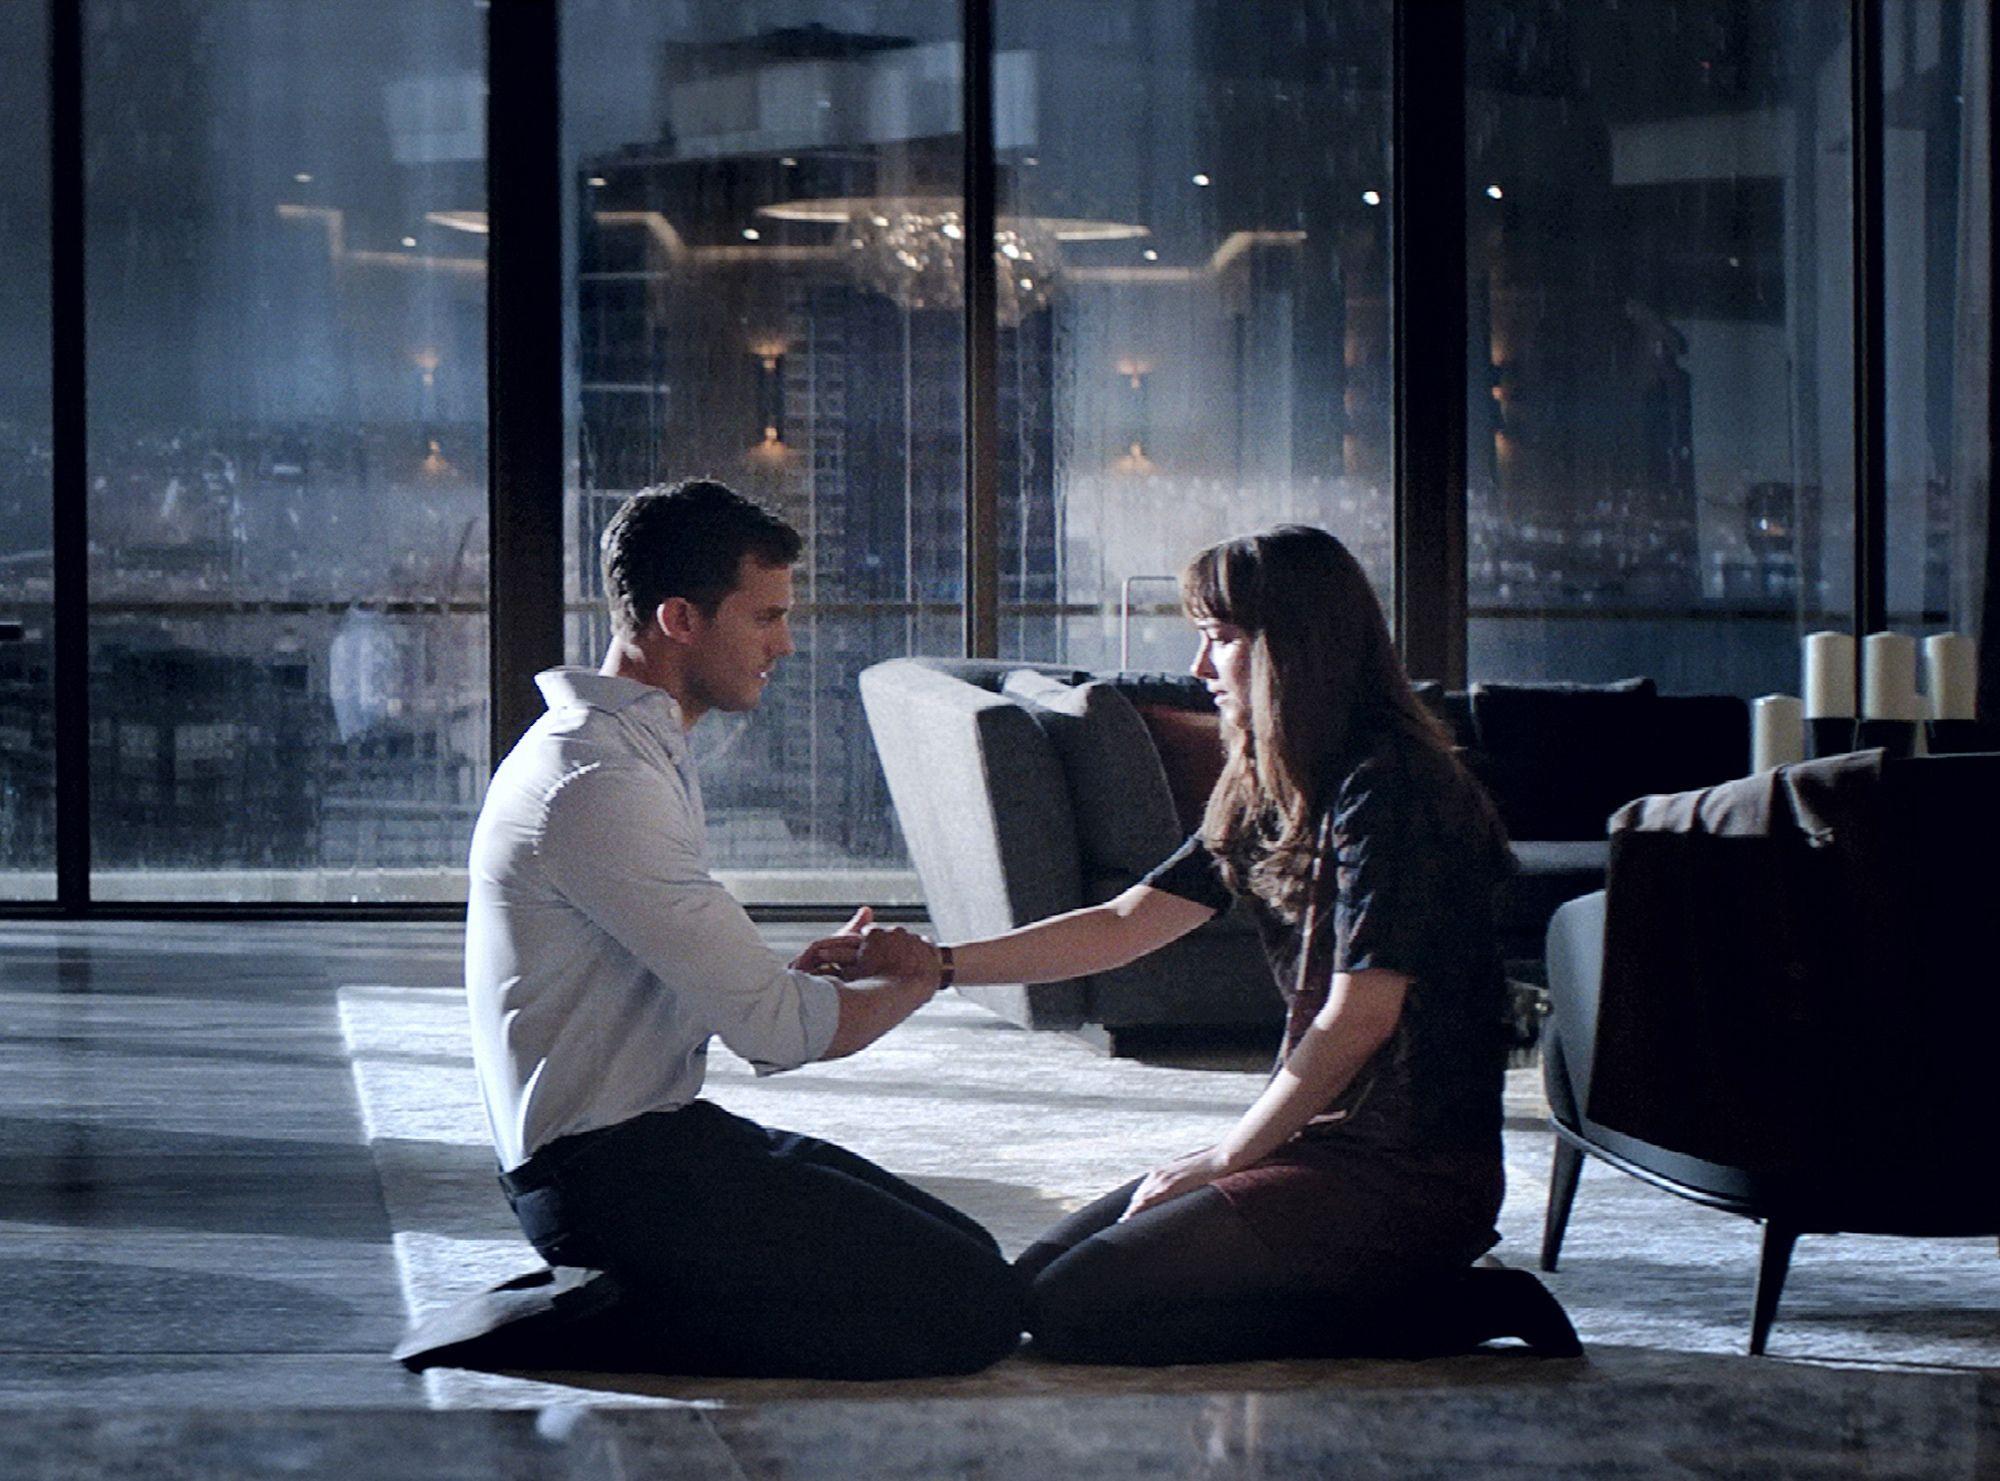 Fifty Shades Darker: What to Know Before Seeing the Movie